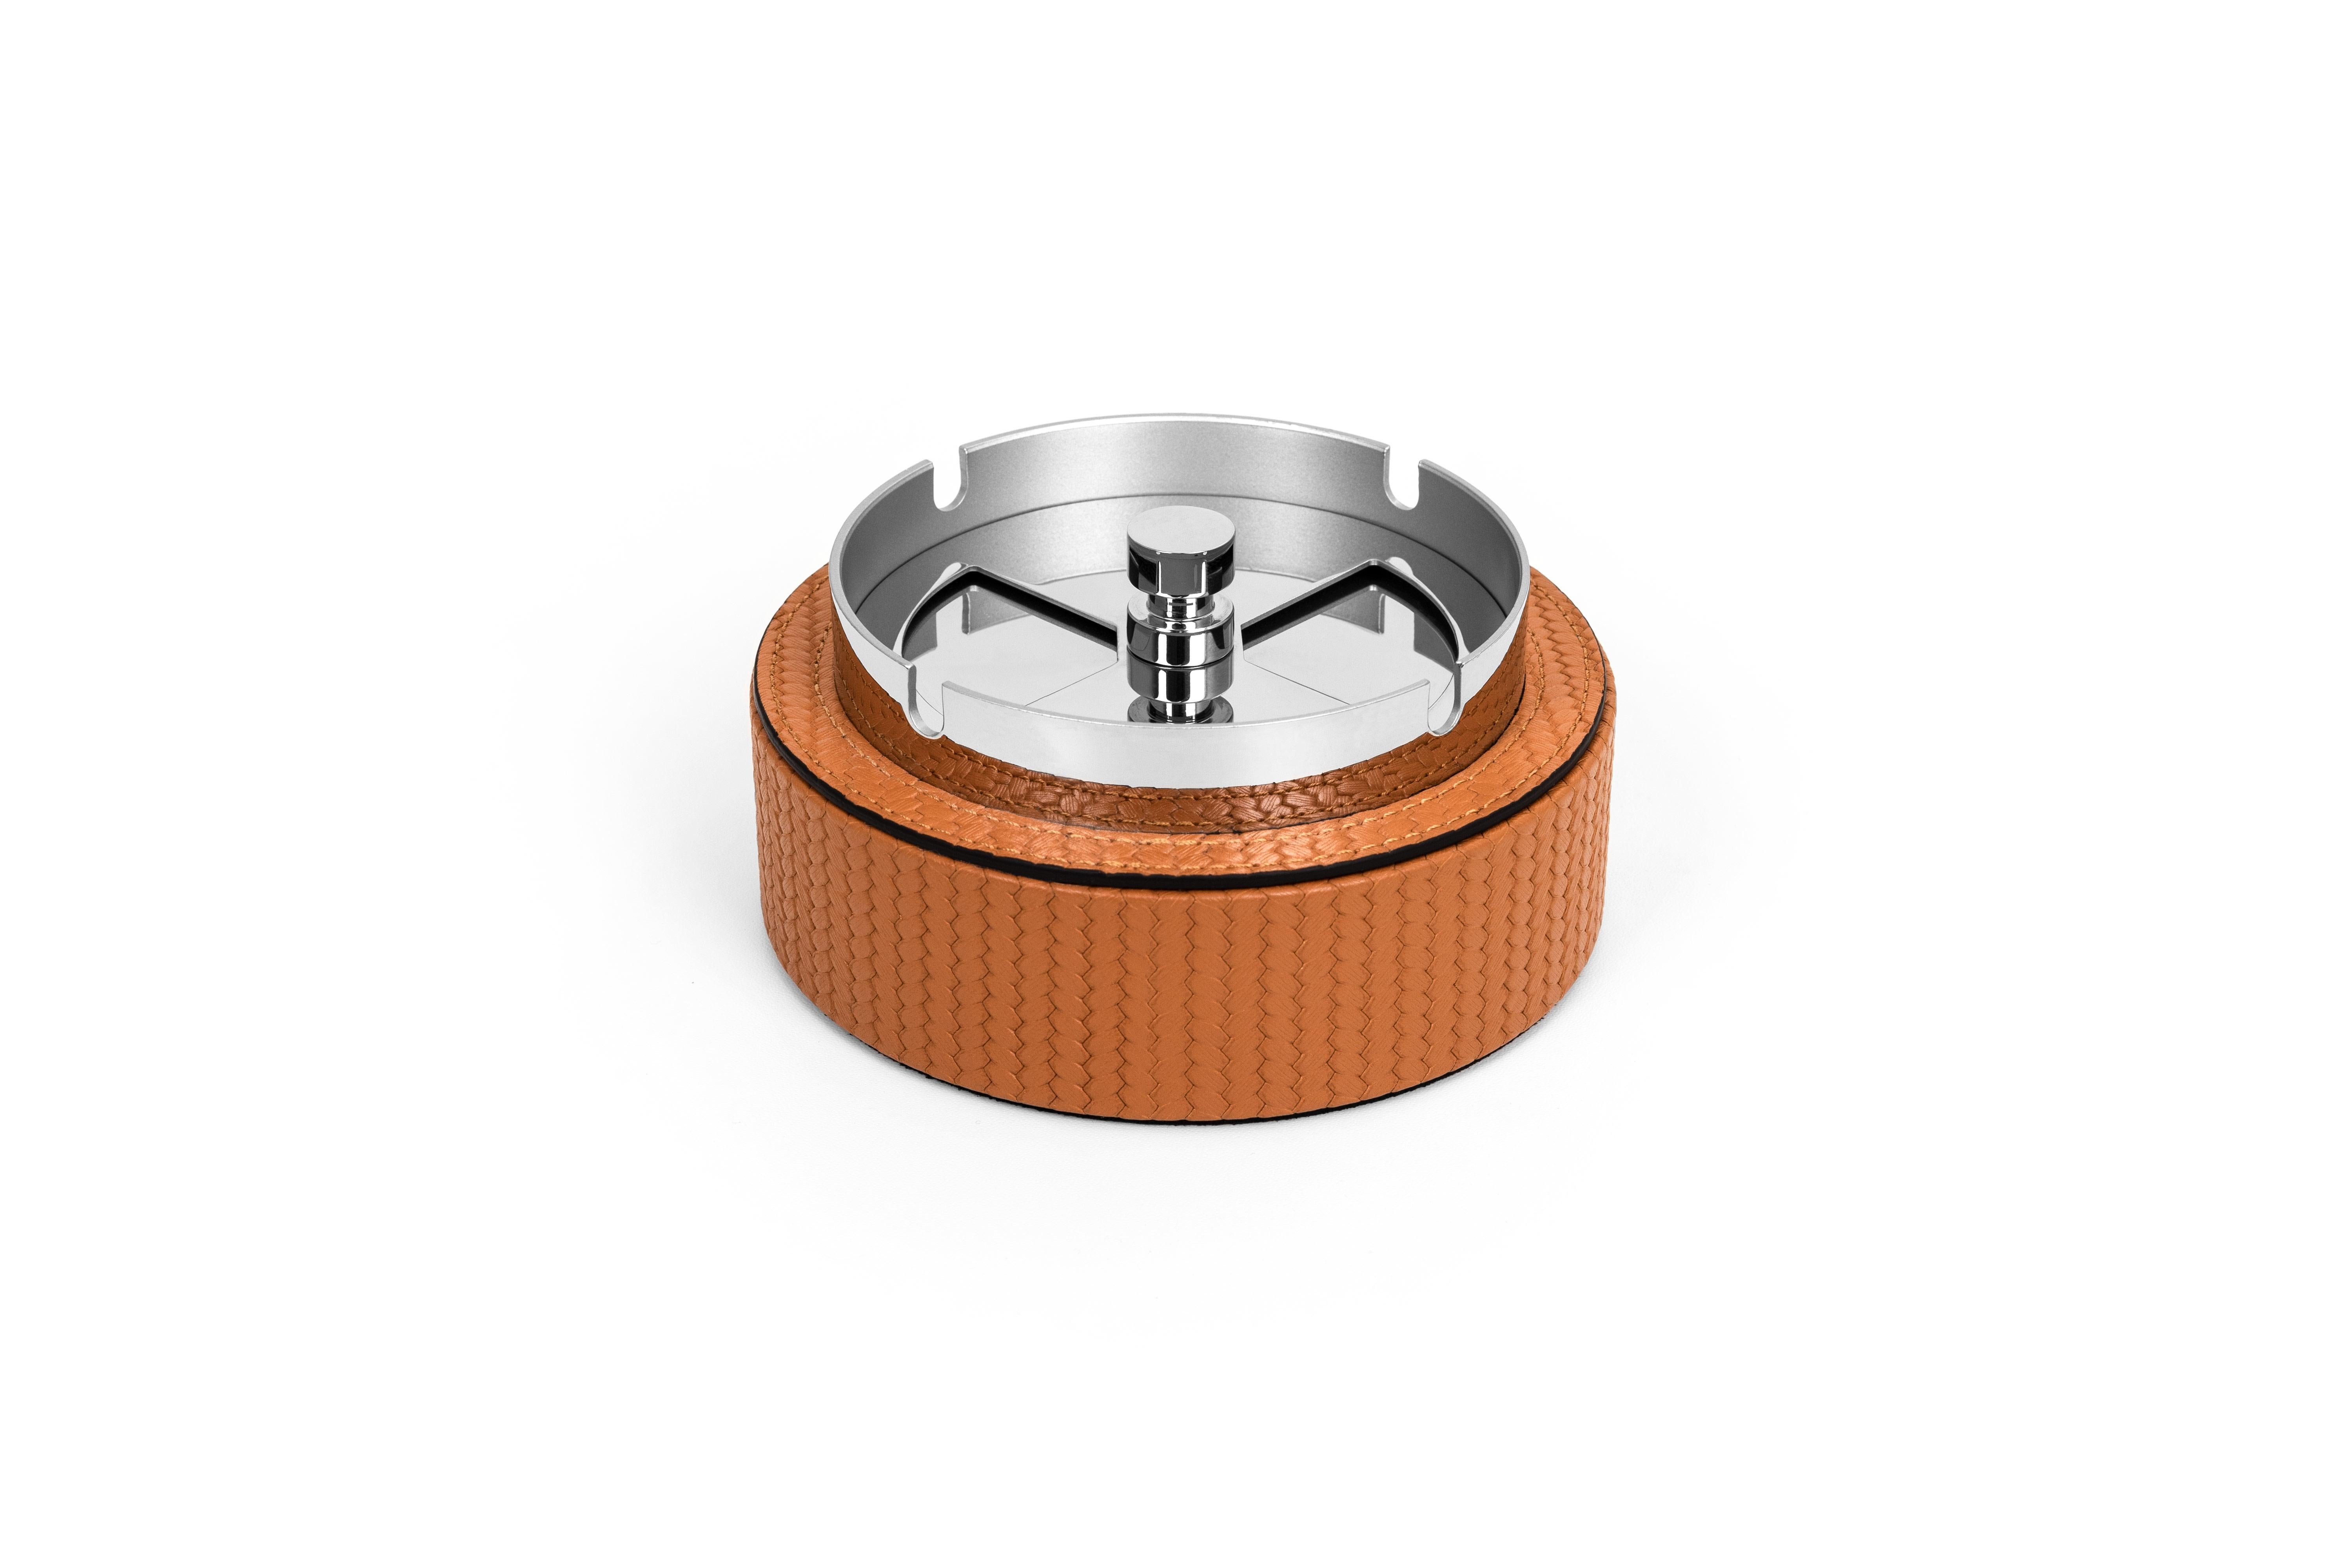 Welcome inside Pinetti smoking accessories collection with Vento ashtray. A stainless steel round revolving ashtray with the properly right spaces to perfectly keep the cigarettes.

Our wind-proof ashtray is beautifully finished with a sleek